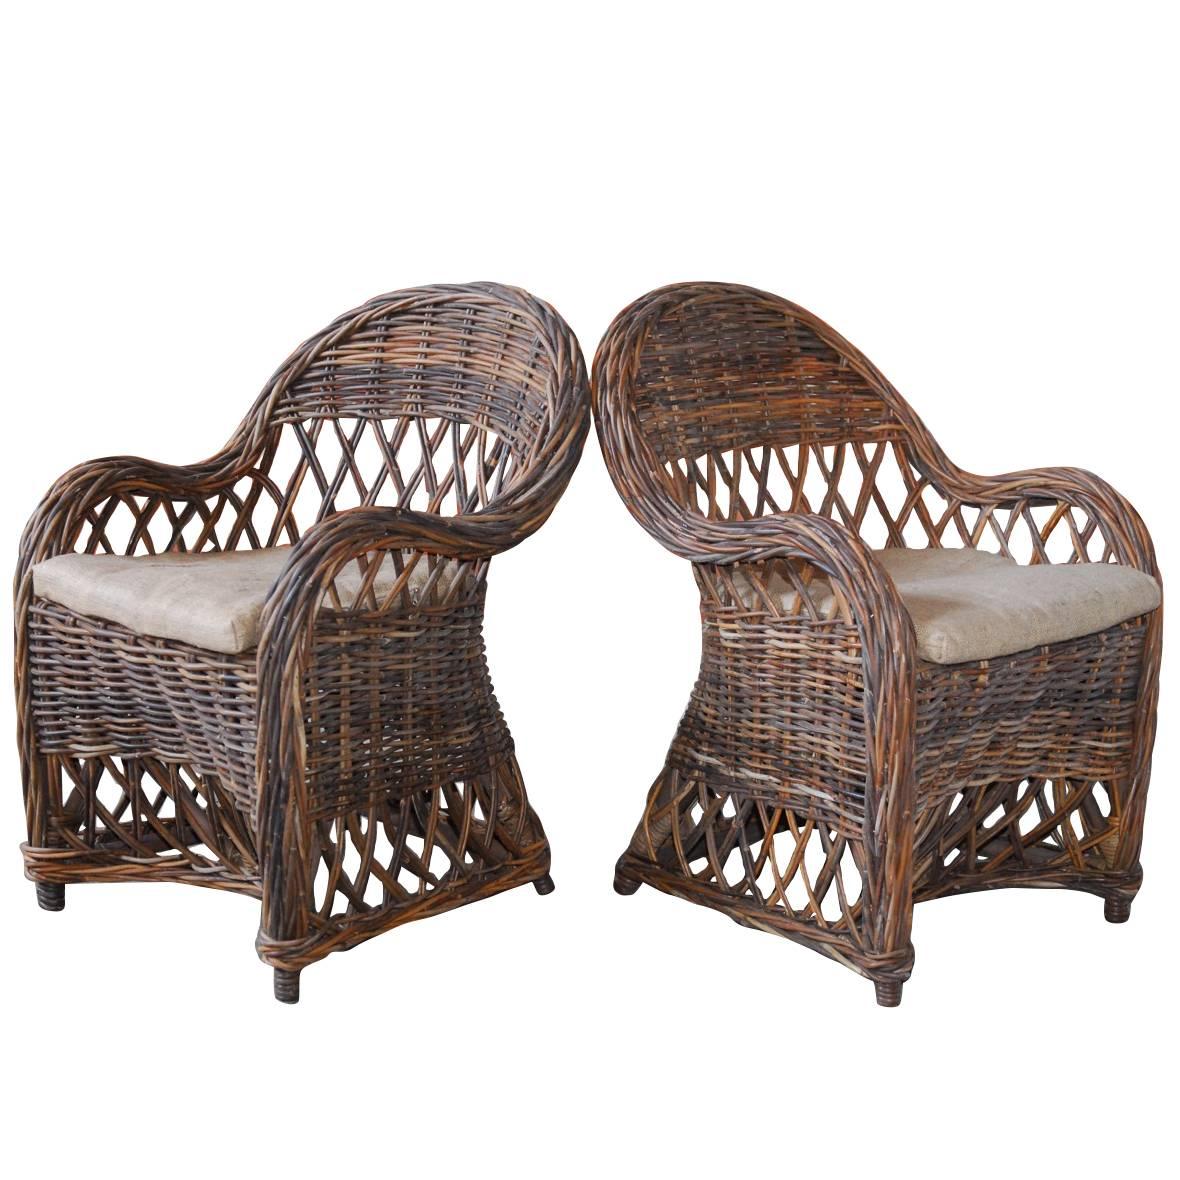 Pair of Bar Harbor Style Woven Rattan Armchairs